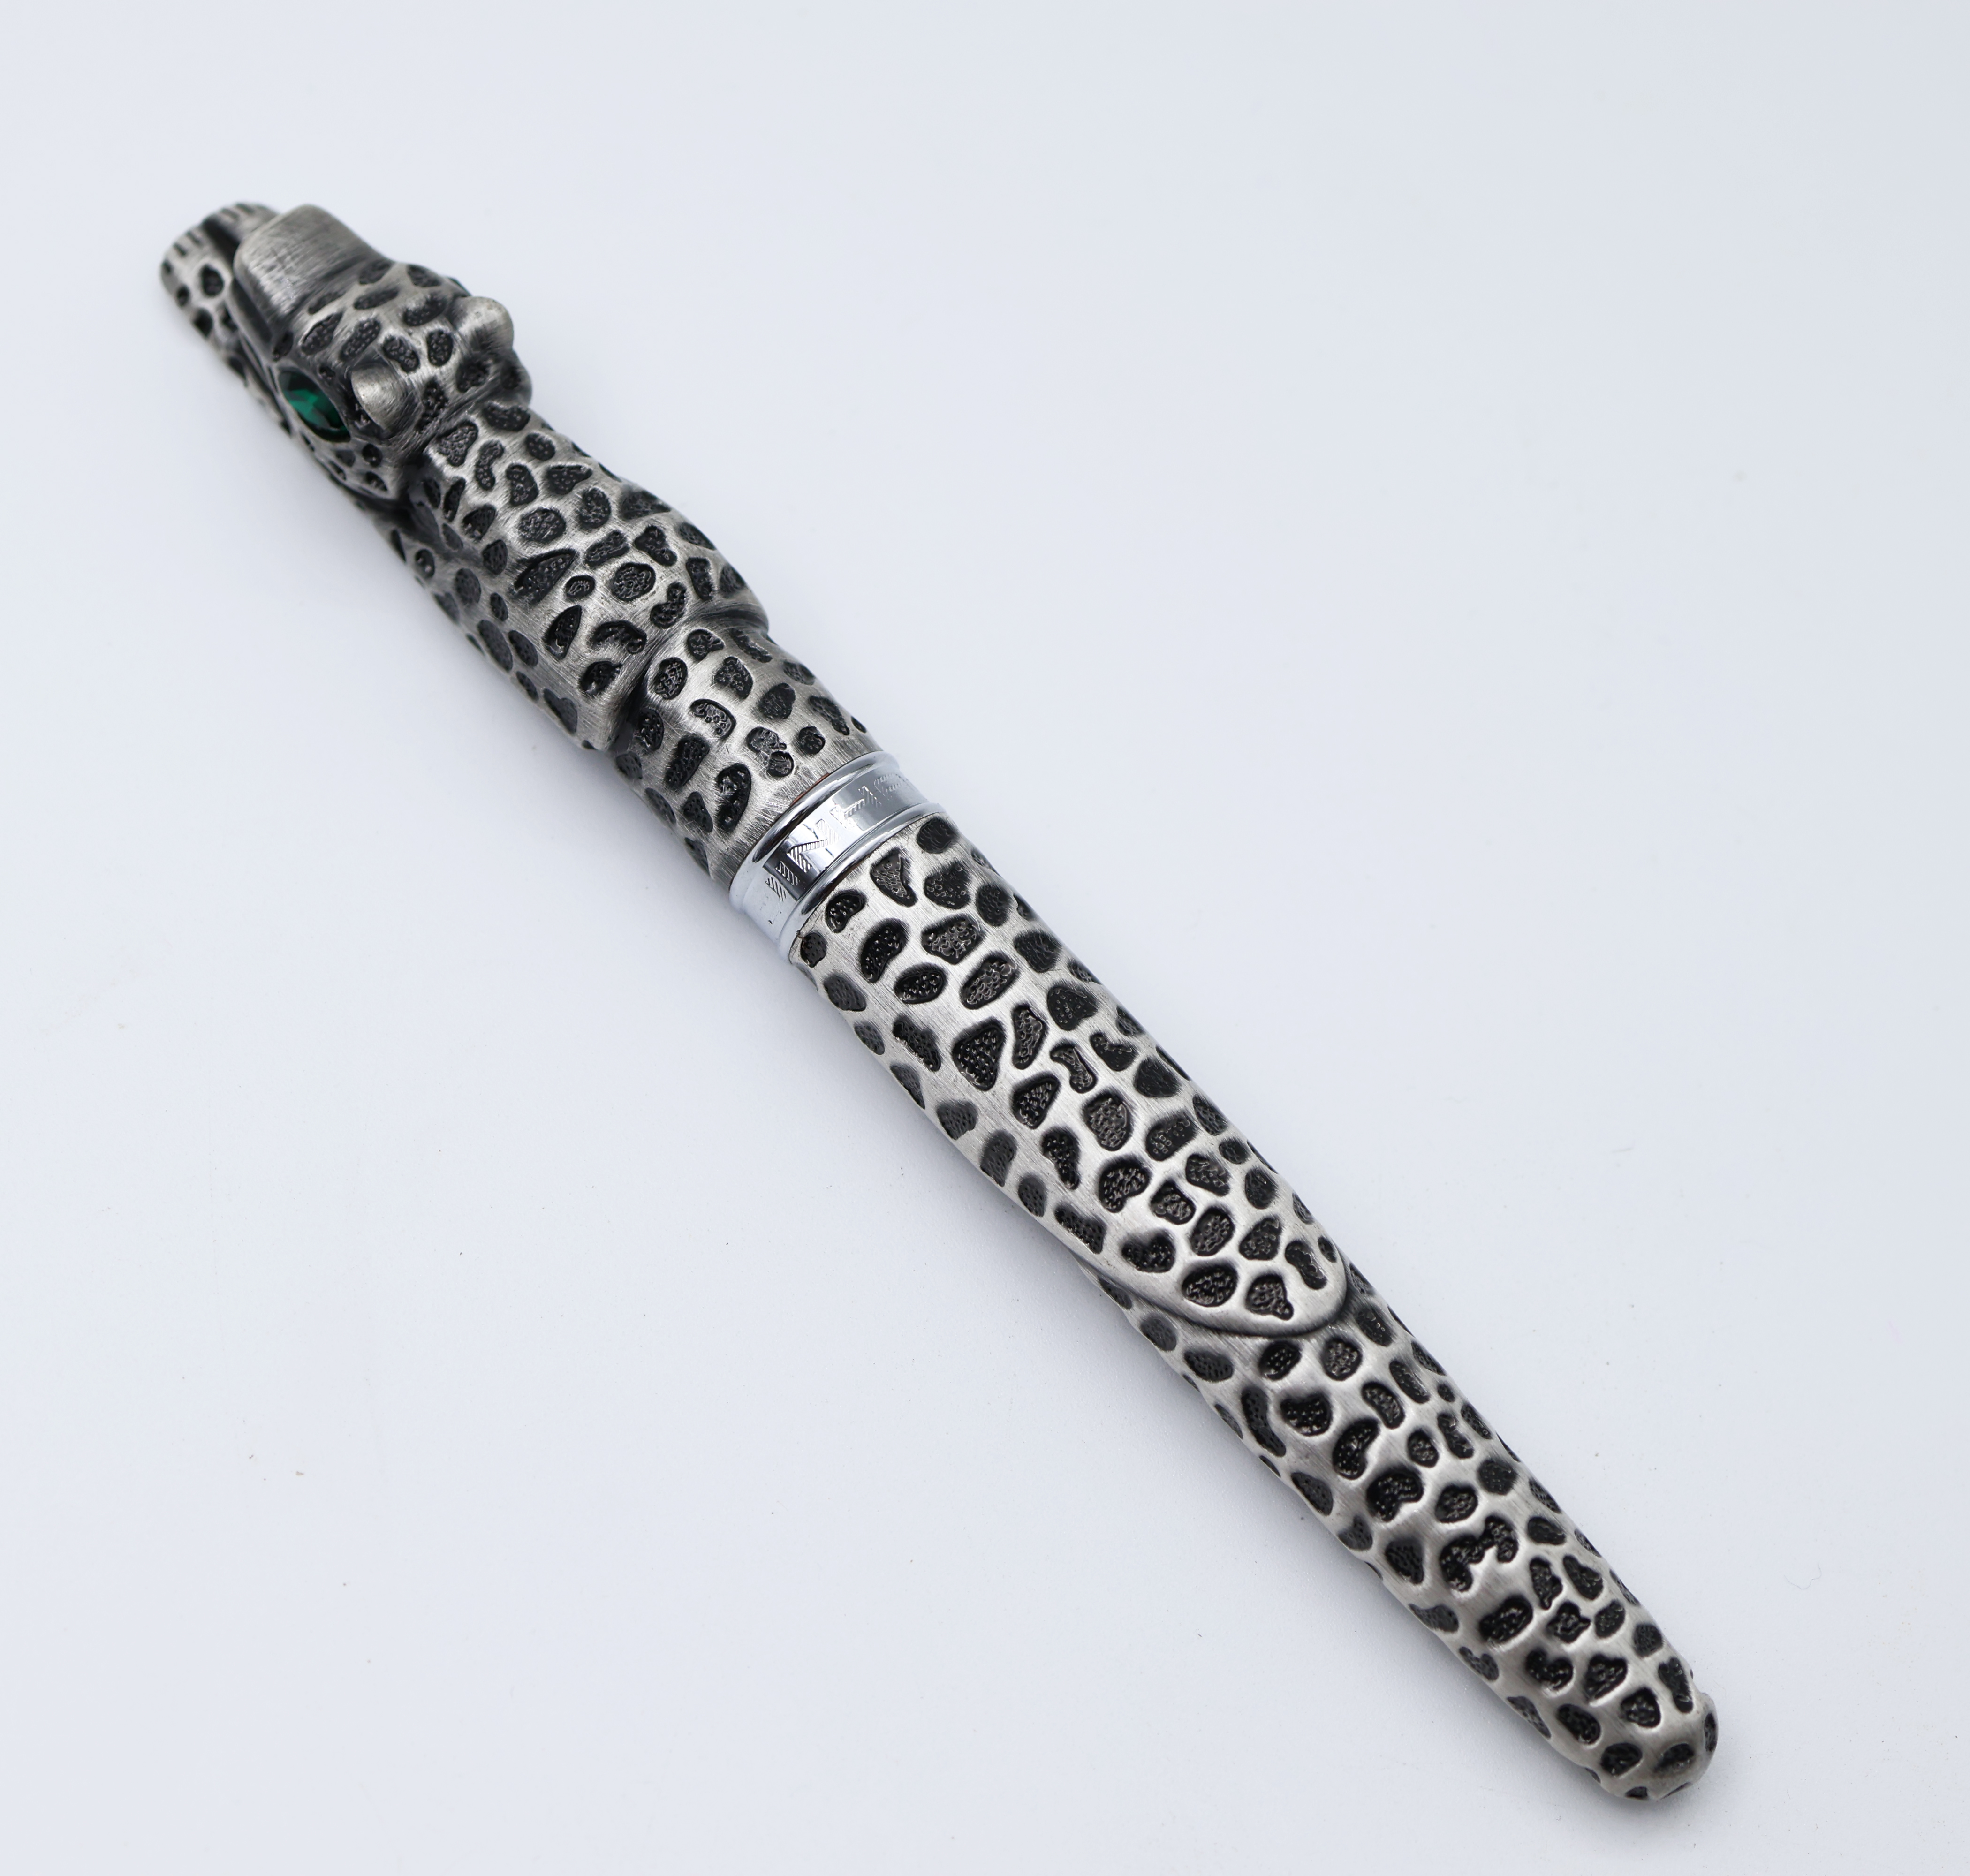 Jinhao Grey Leopard Panther Designed Body With Green Stone Eyes Medium Tip Roller Ball Pen SKU 24825